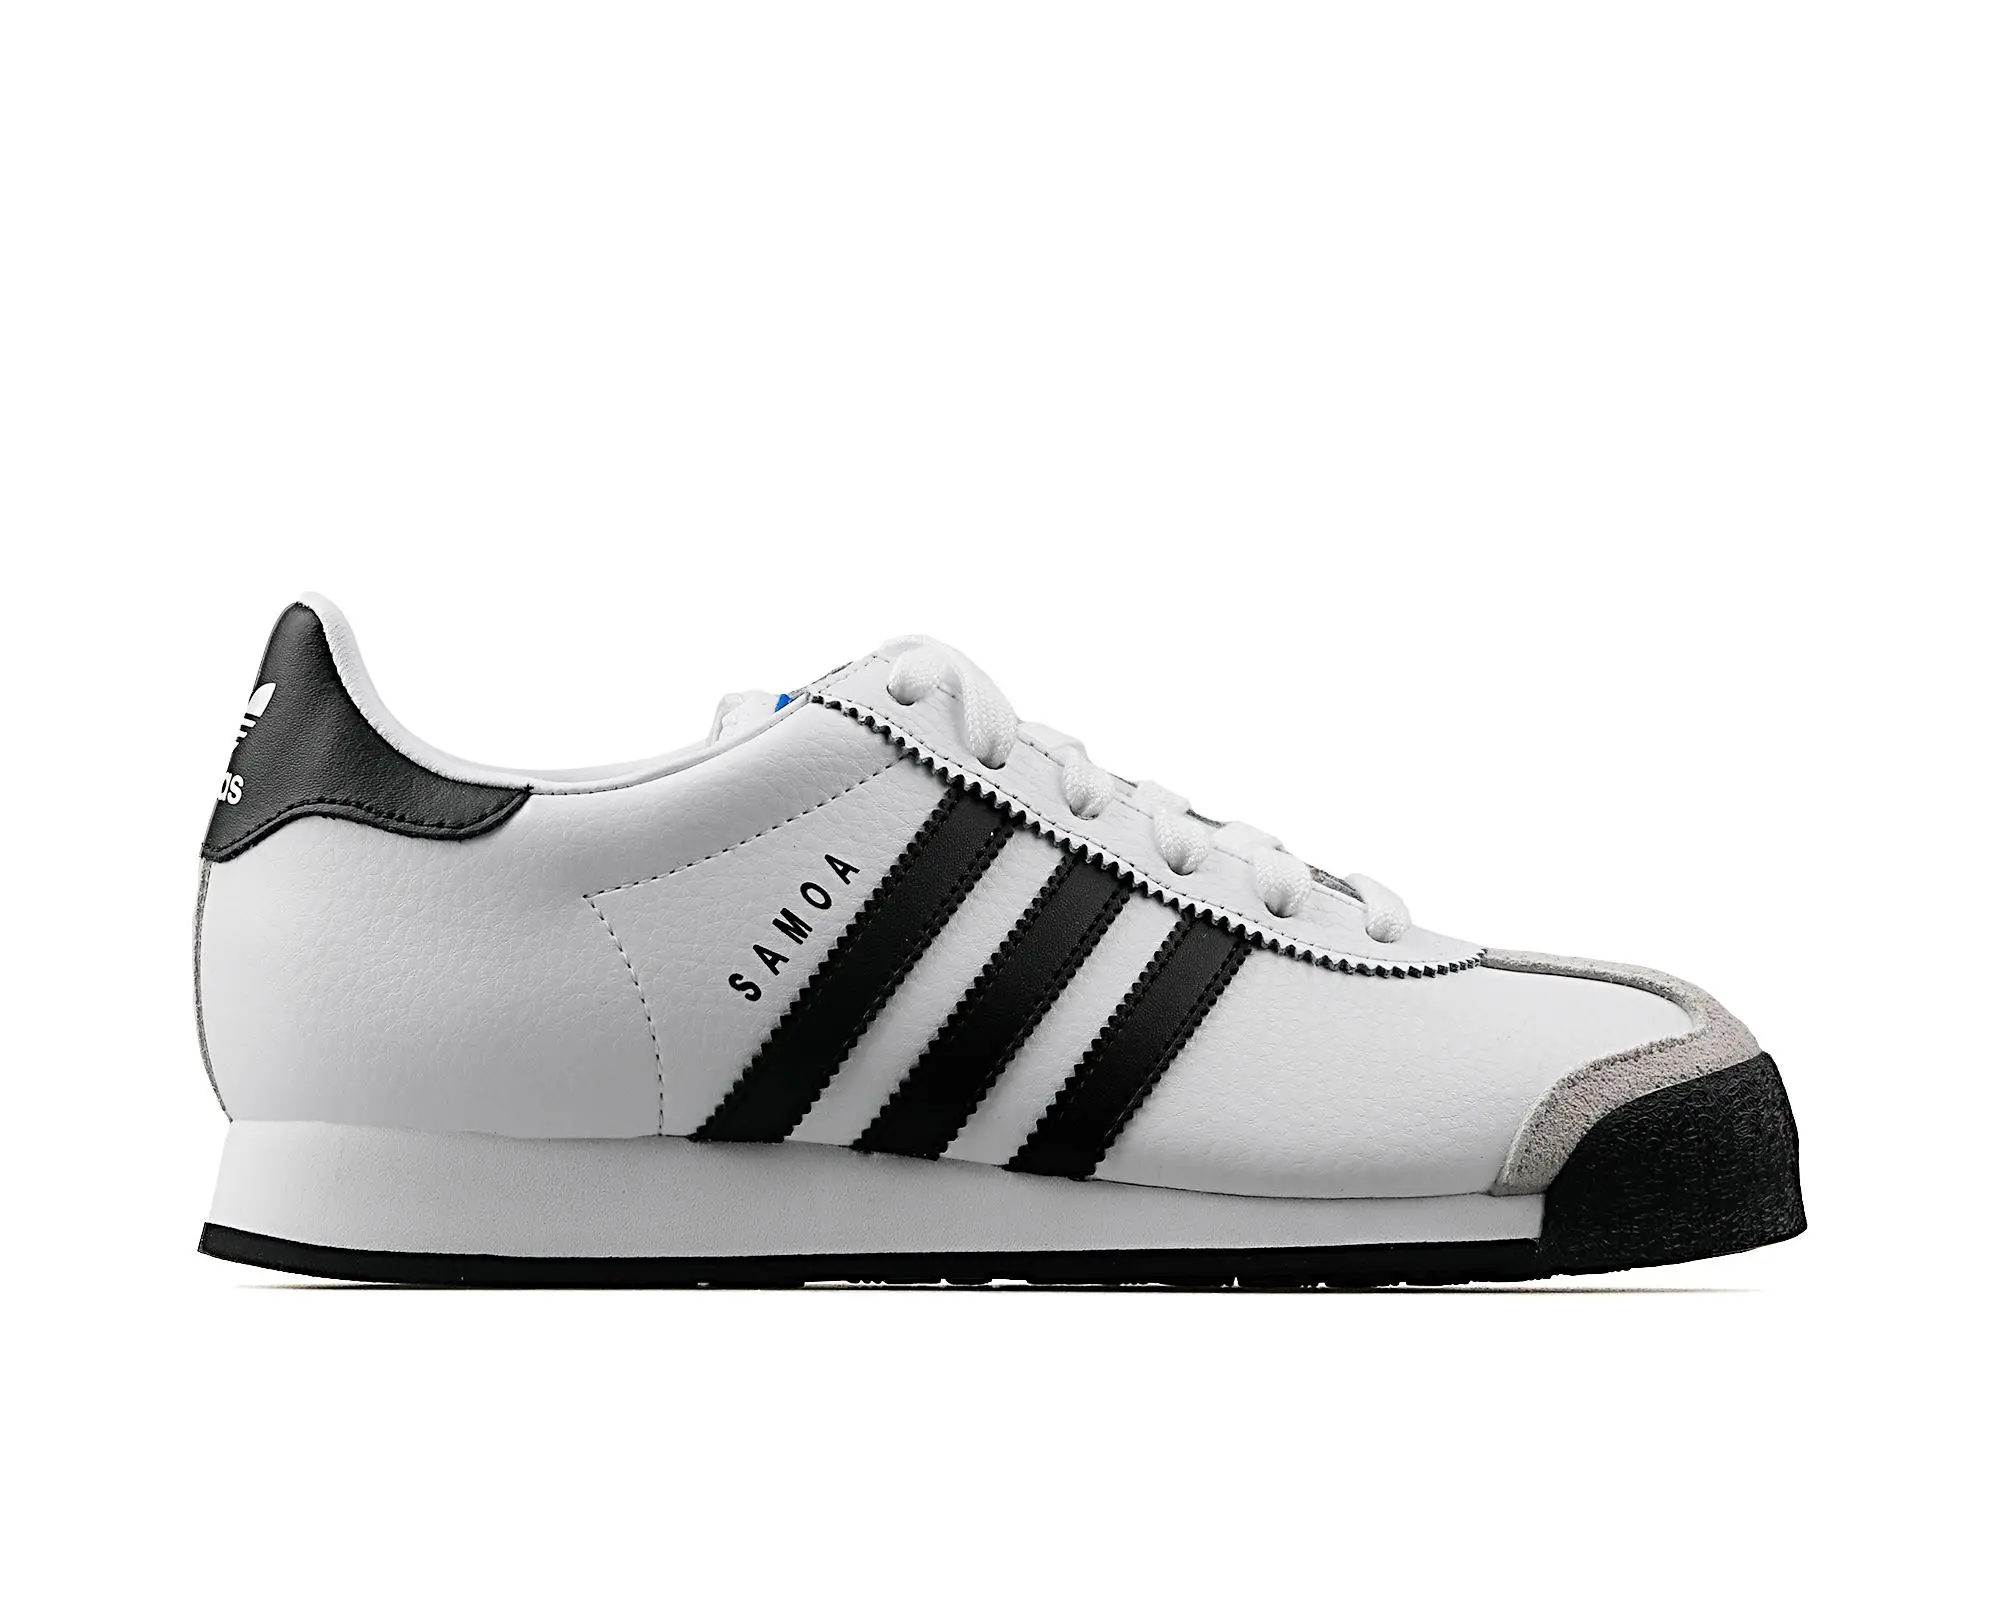 Adidas Original Unisex Samoa Casual Shoes suit For Men And Women Casual Walking, Comfortable Sport Sneakers